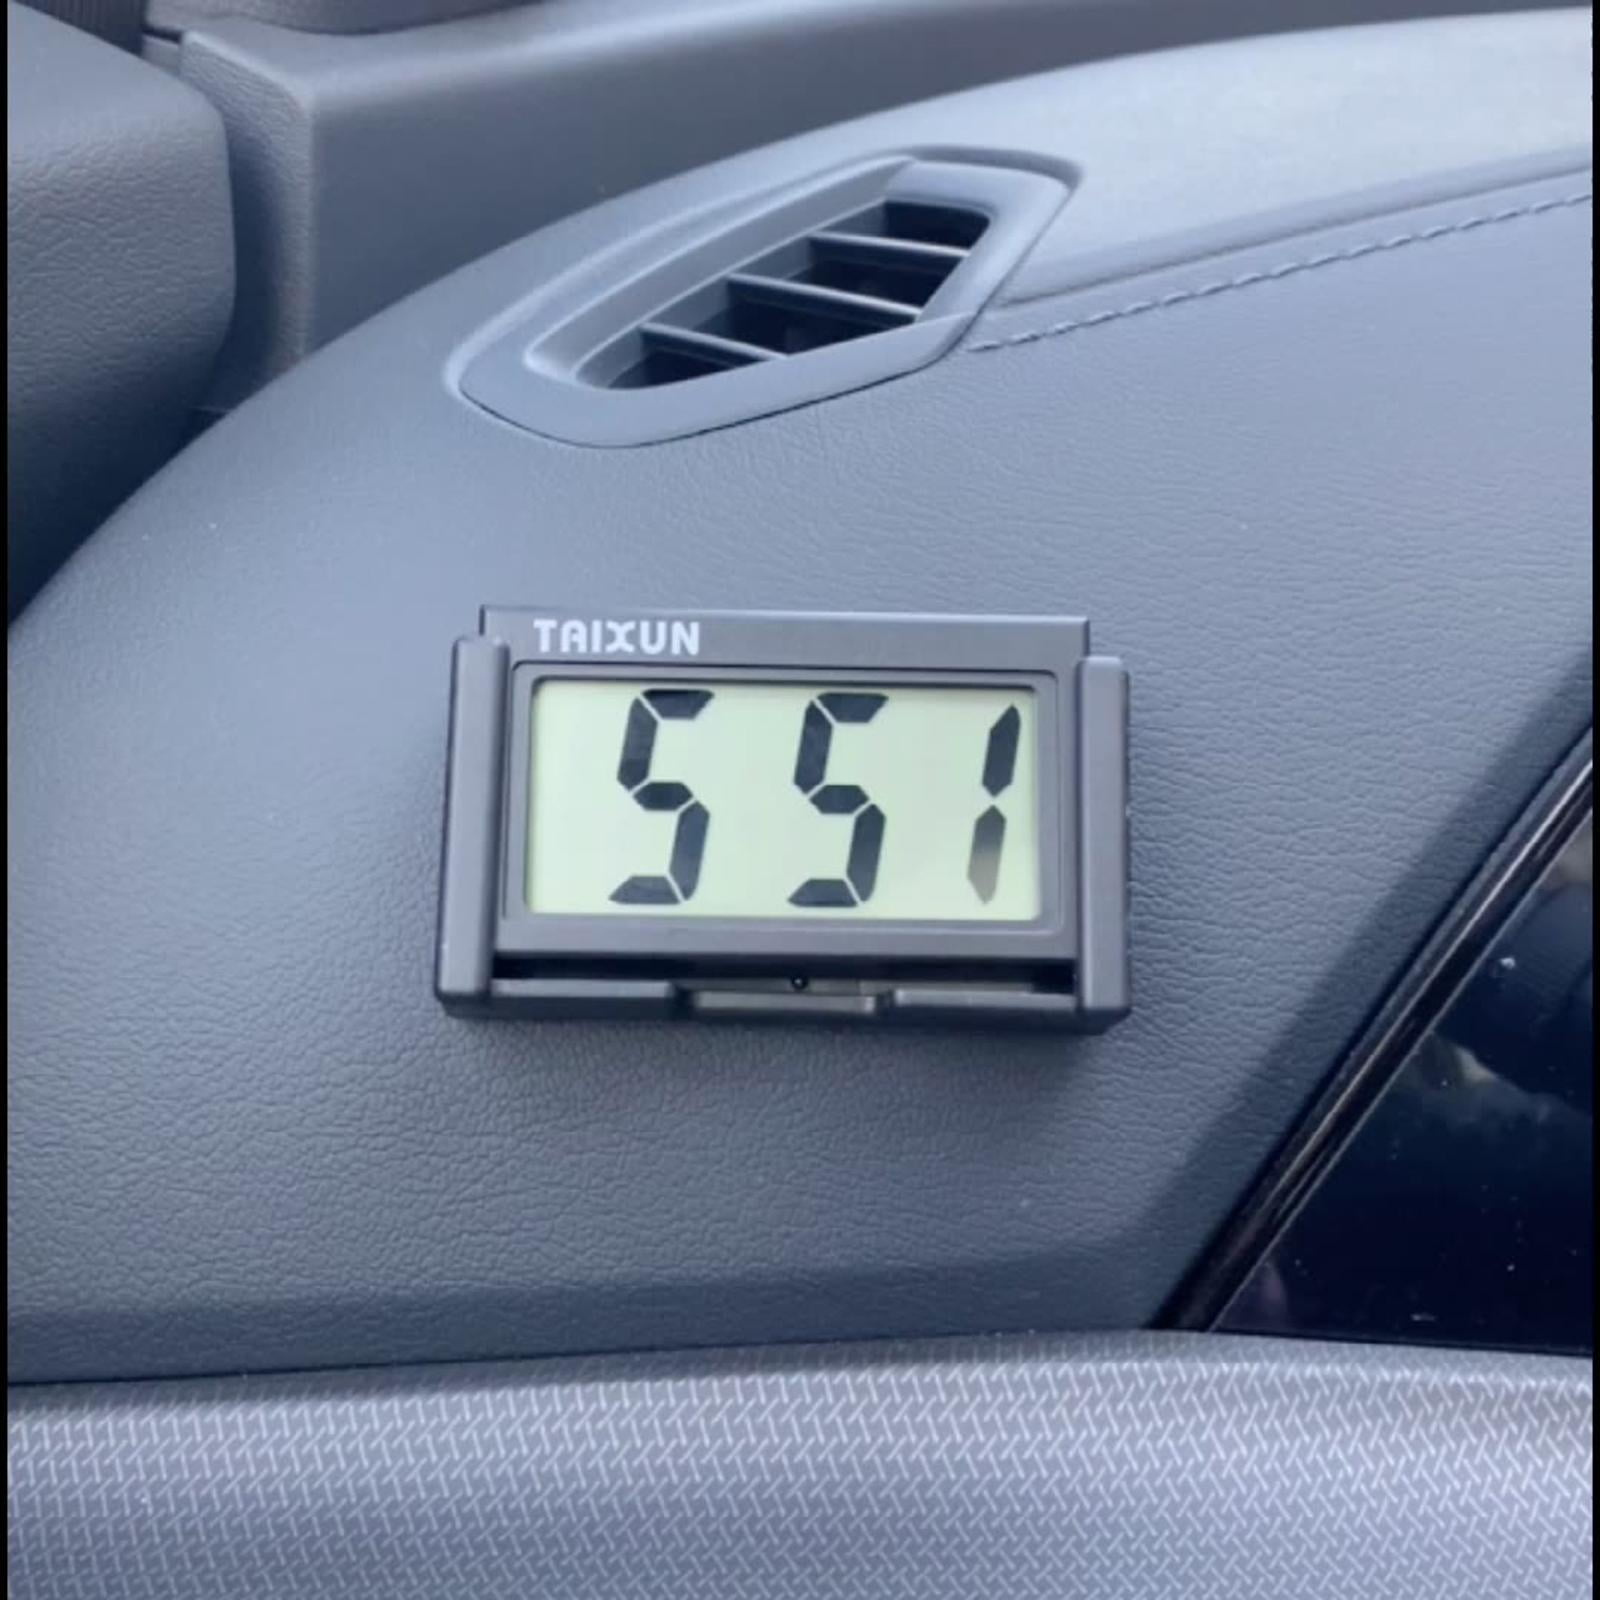 Upgrade Your Car Interior with this Stylish Mini Car Clock & Thermometer